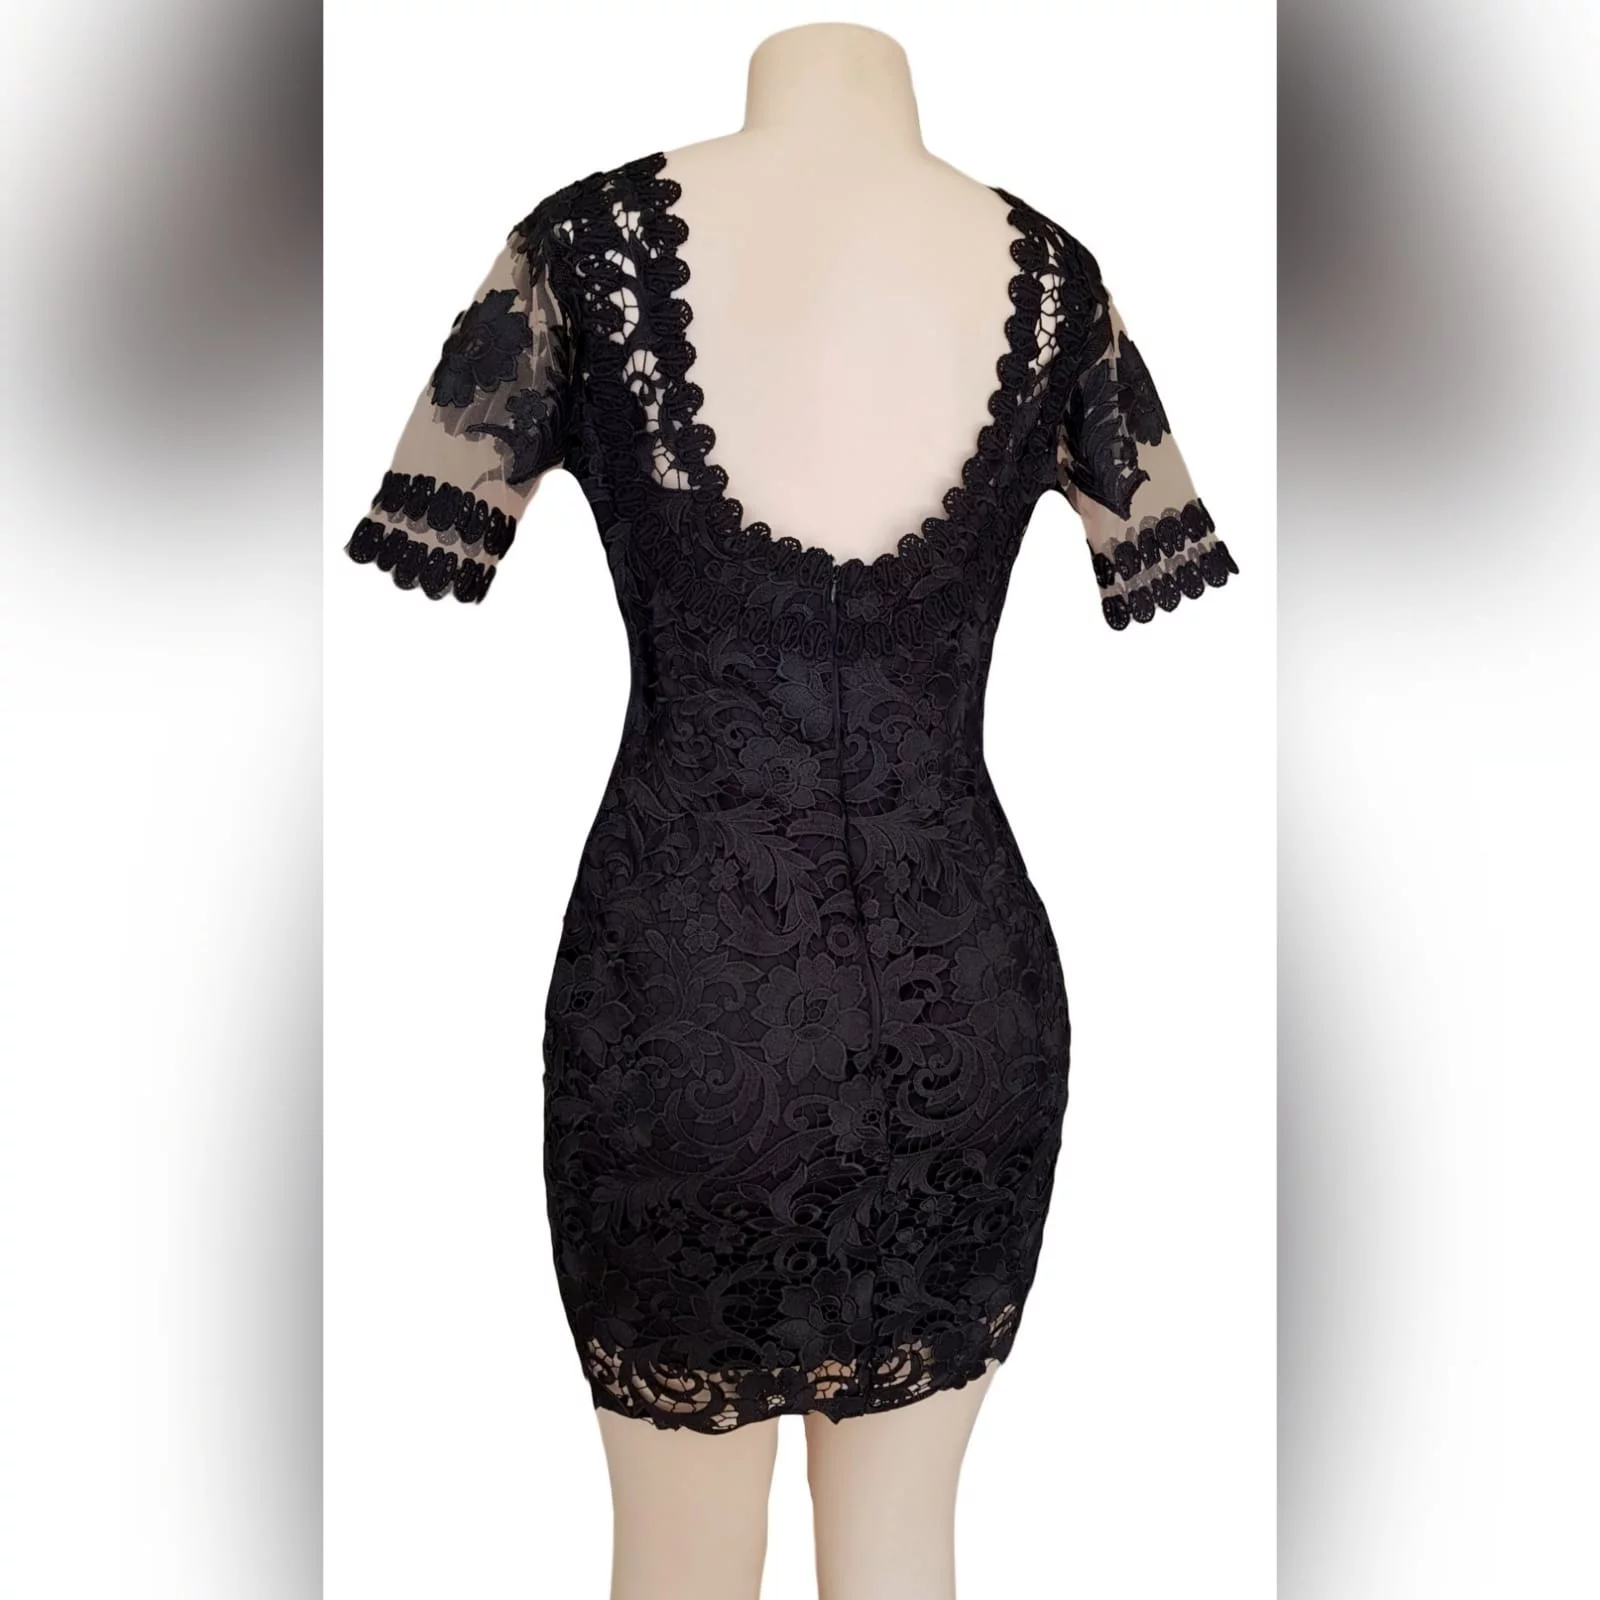 Black short guipure lace evening dress 2 black short guipure lace evening dress with a rounded front and back neckline. With sheers short sleeves detailed with lace.